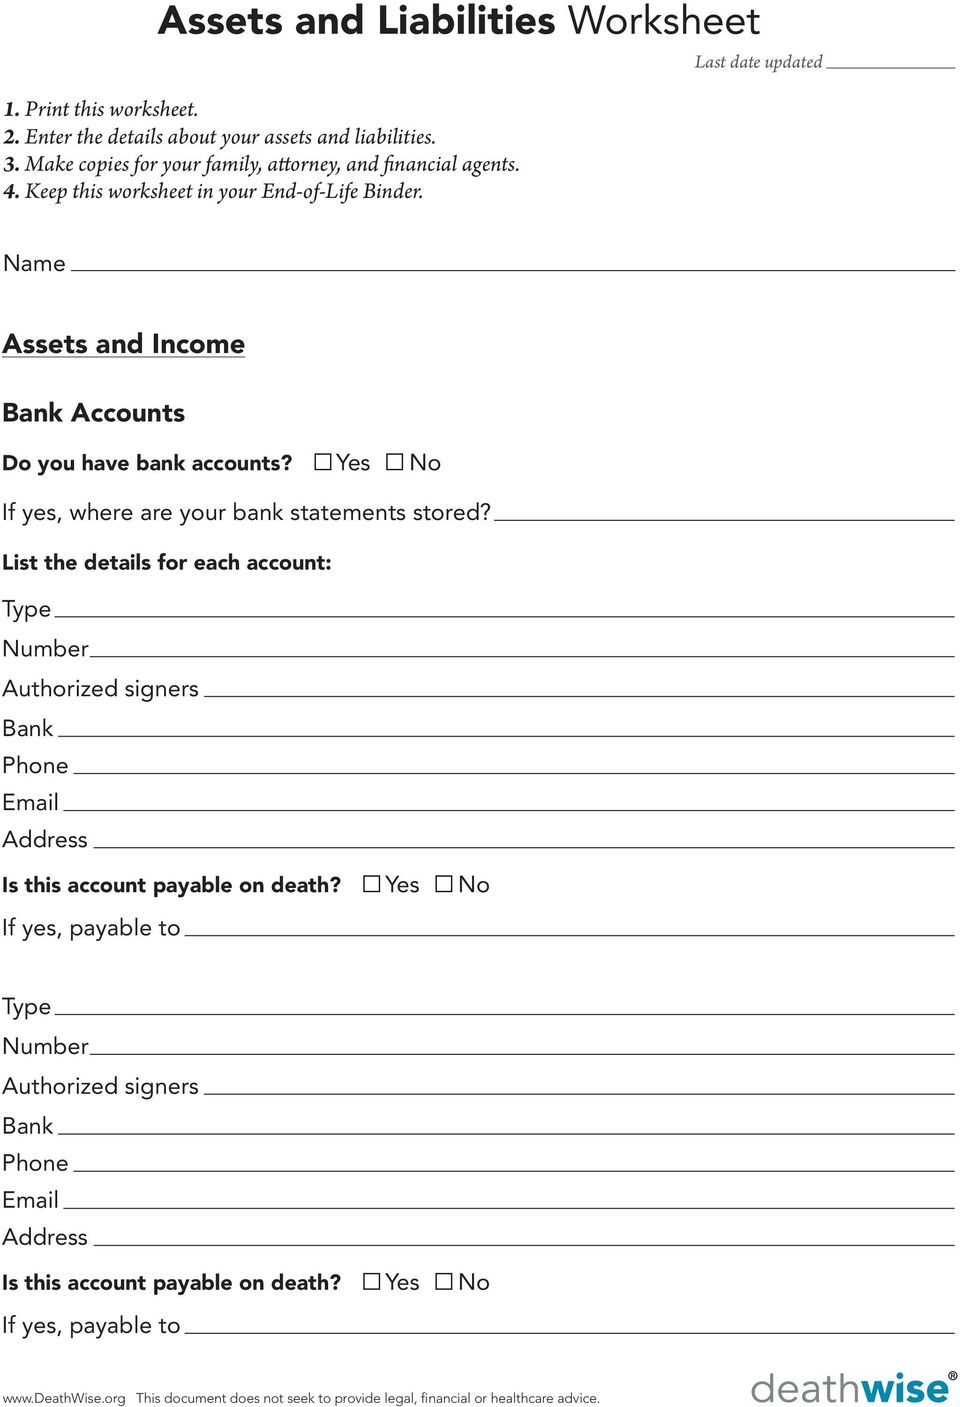 Assets and Liabilities Worksheet - PDF Free Download Inside Assets And Liabilities Worksheet